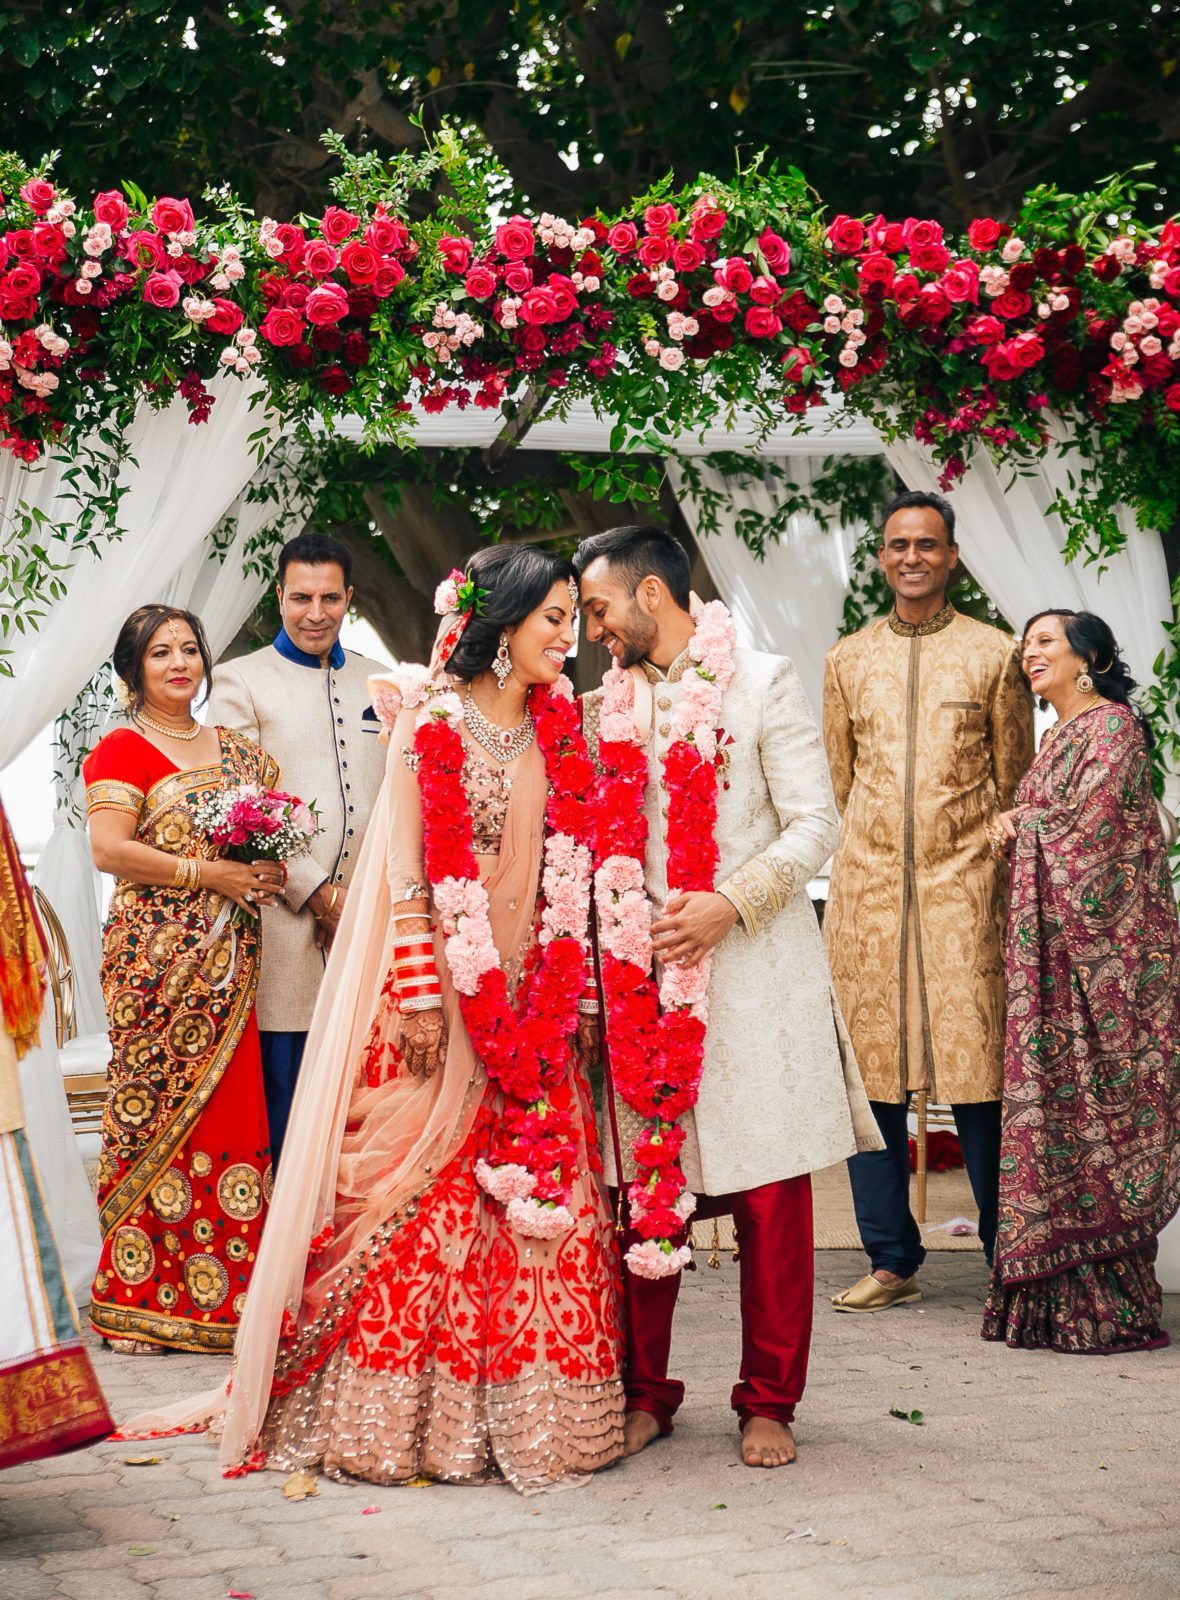 The Most Stunning Indian Wedding in San Pedro - Feathered Arrow Wedding Planning -   13 wedding Indian fashion ideas